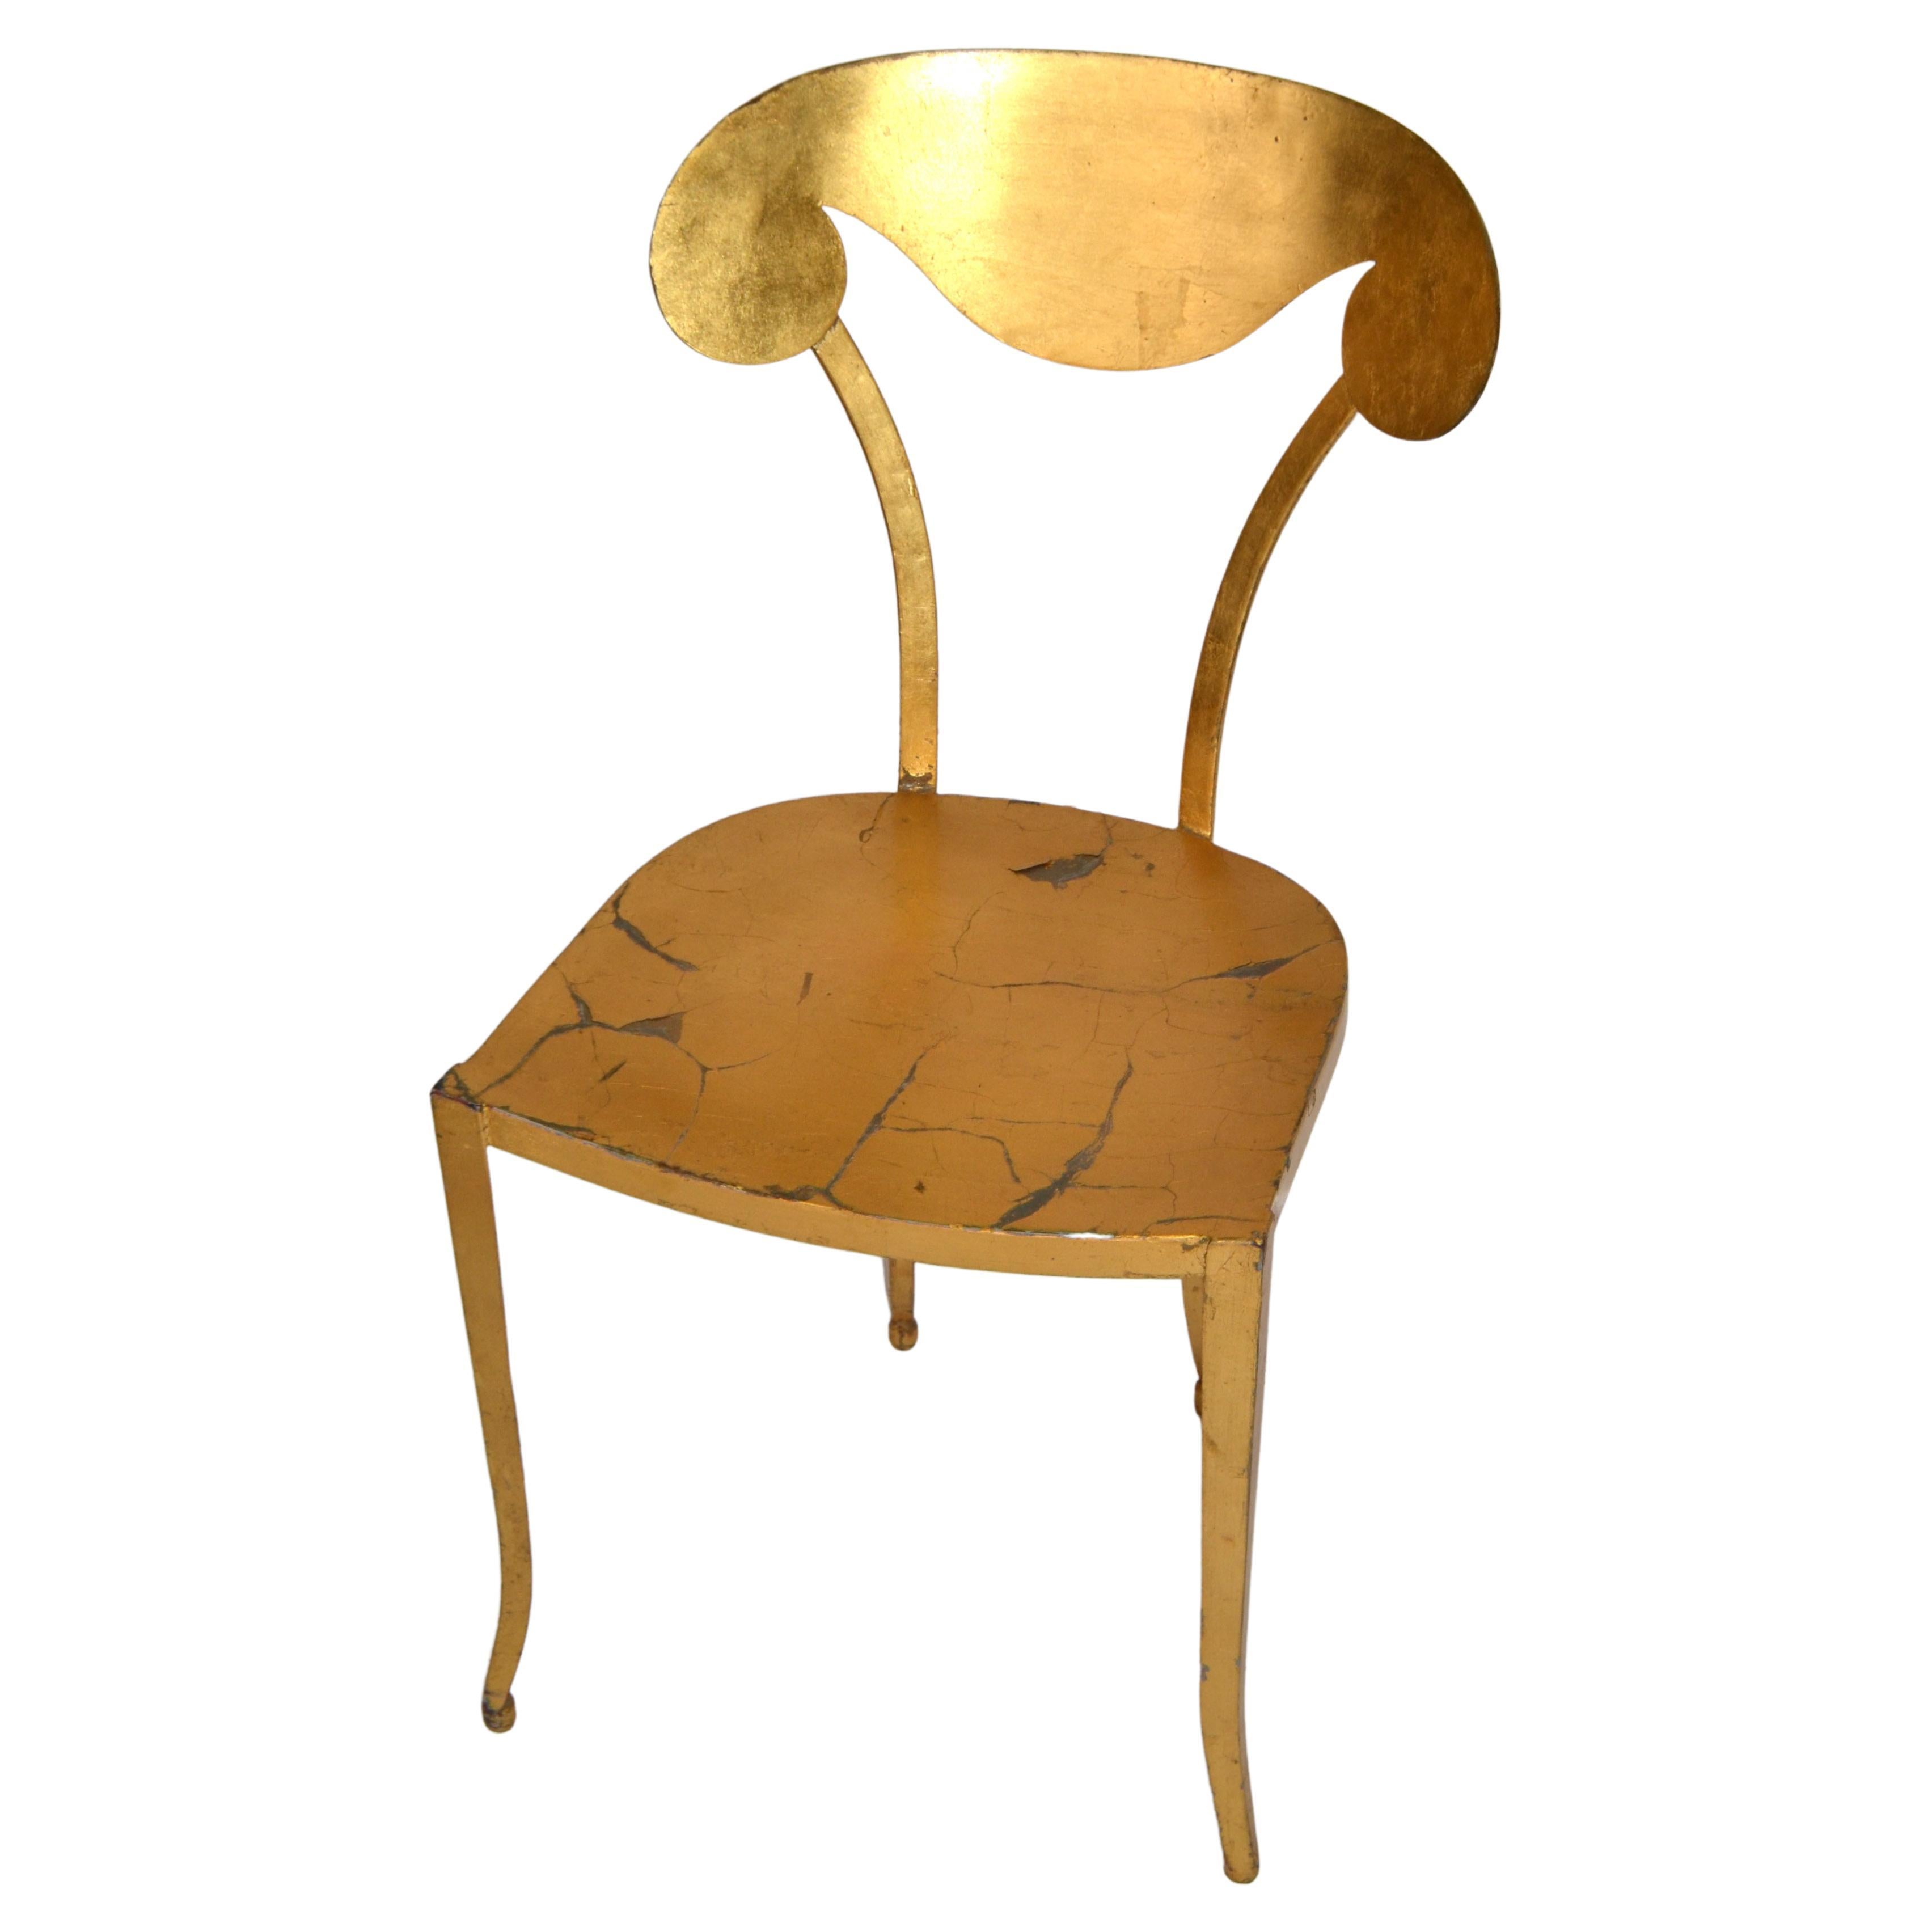 Hand-Painted Italian Art Deco Style Sculptural Gilt Steel Vanity Desk Side Chair Distressed For Sale